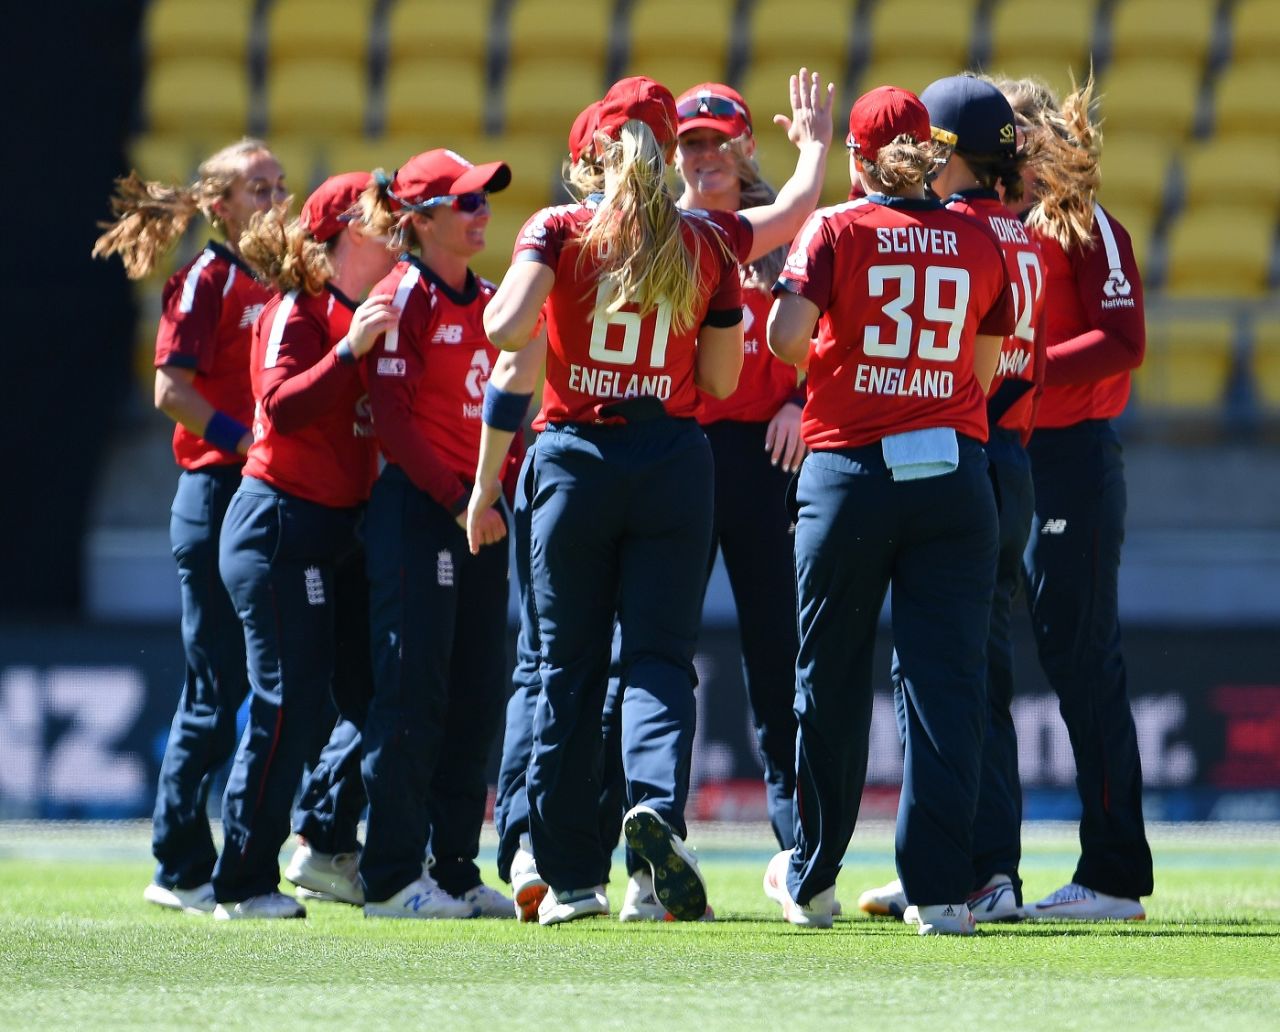 The England players celebrate the wicket of Sophie Devine, New Zealand Women vs England Women, 2nd T20I, Wellington, March 5, 2021